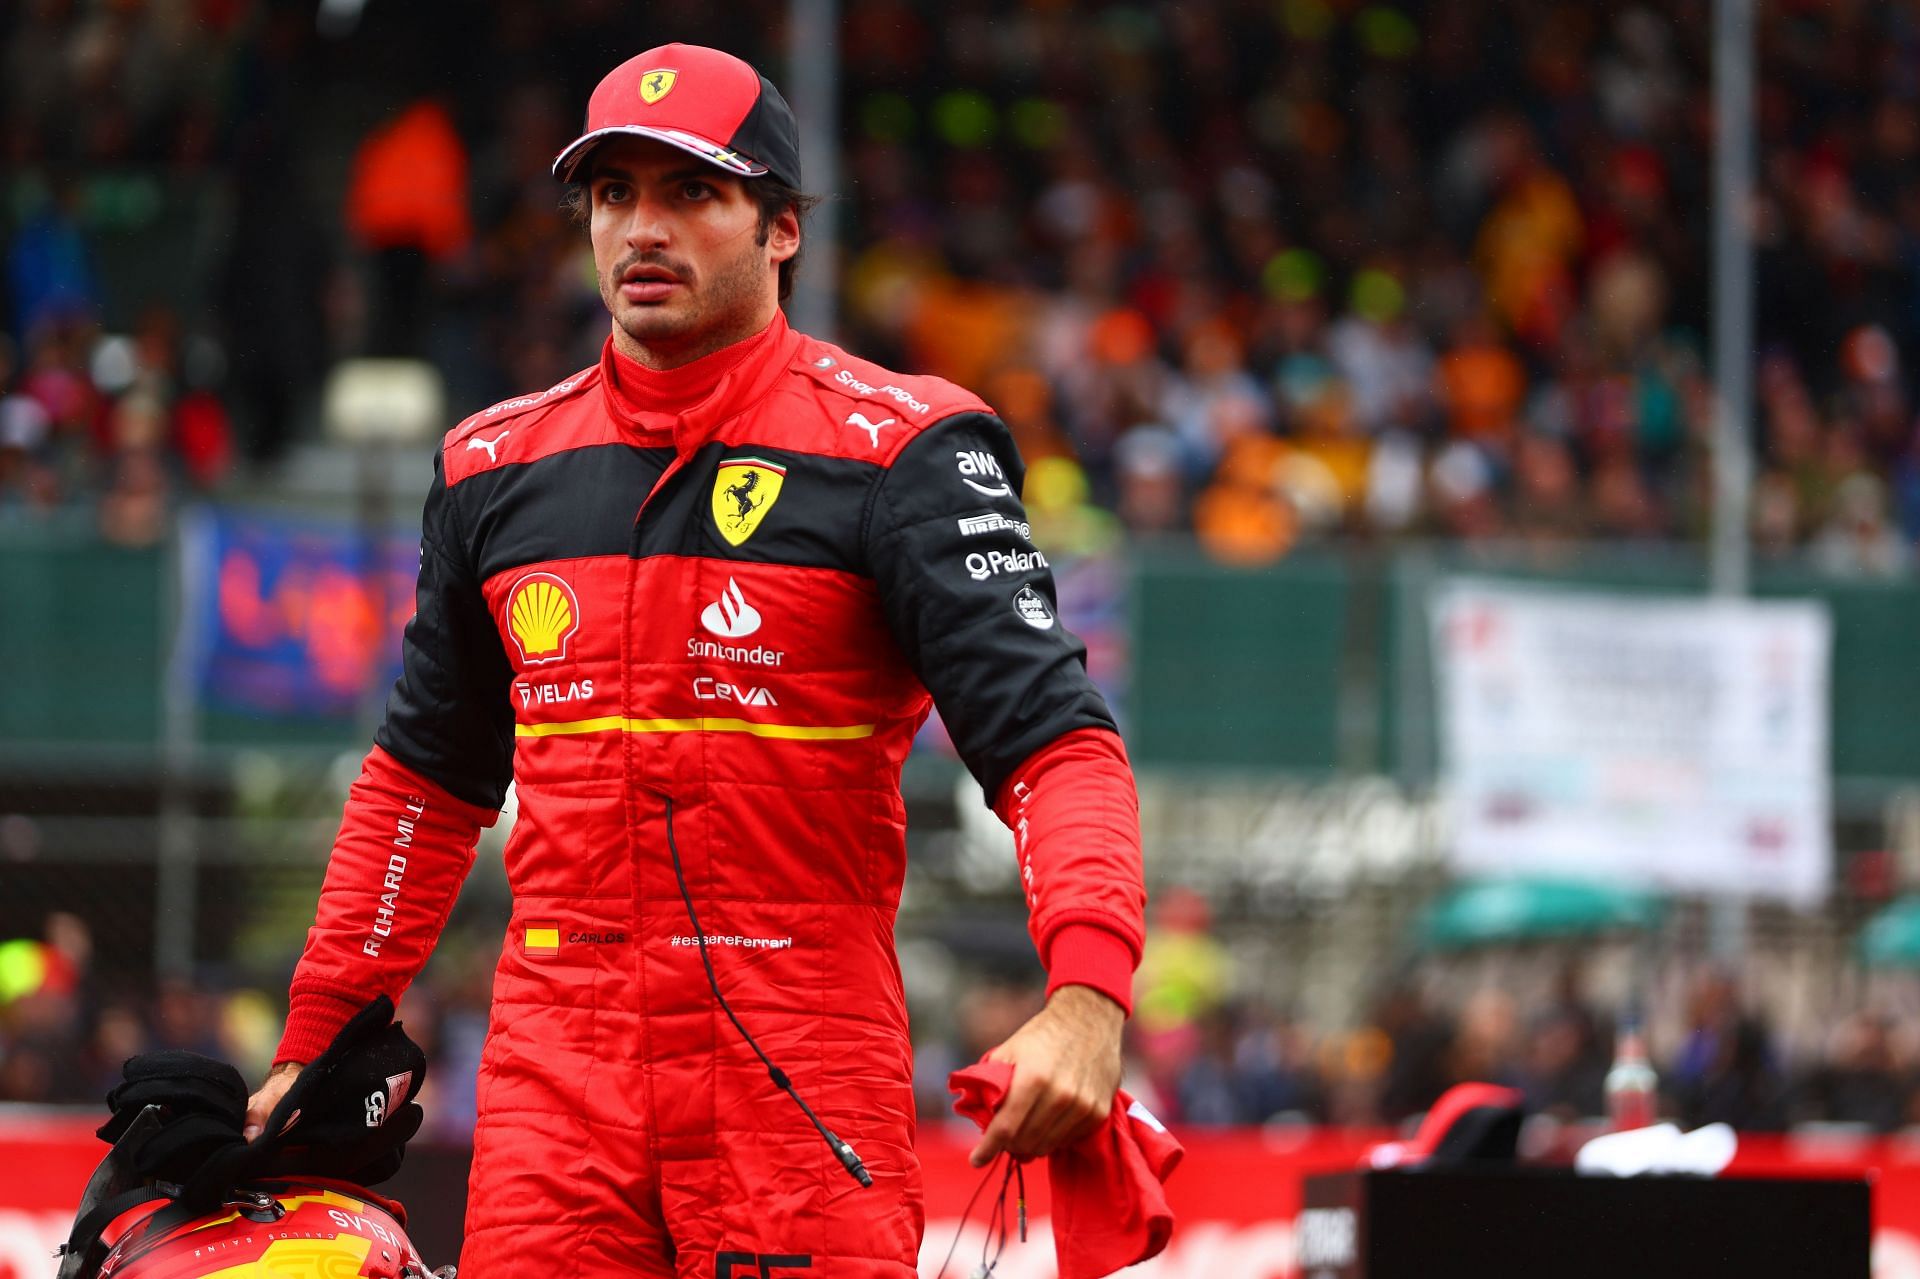 Ferrari driver Carlos Sainz during qualifying for the 2022 F1 British GP (Photo by Mark Thompson/Getty Images)